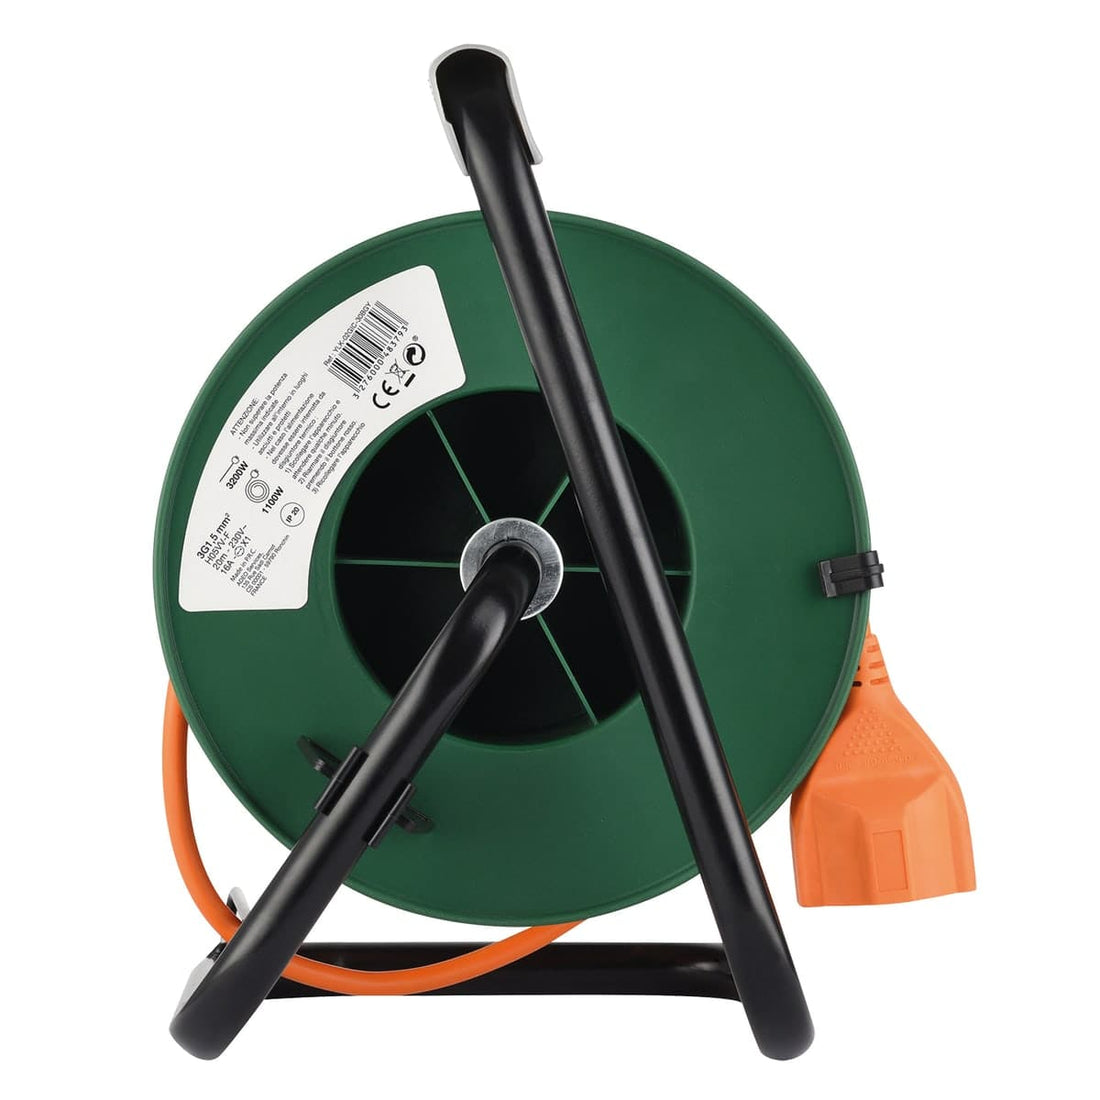 GARDEN CABLE REEL 20MT 16A PLUG 1 UNIVERSAL SOCKET WITH CIRCUIT BREAKER - best price from Maltashopper.com BR420210223